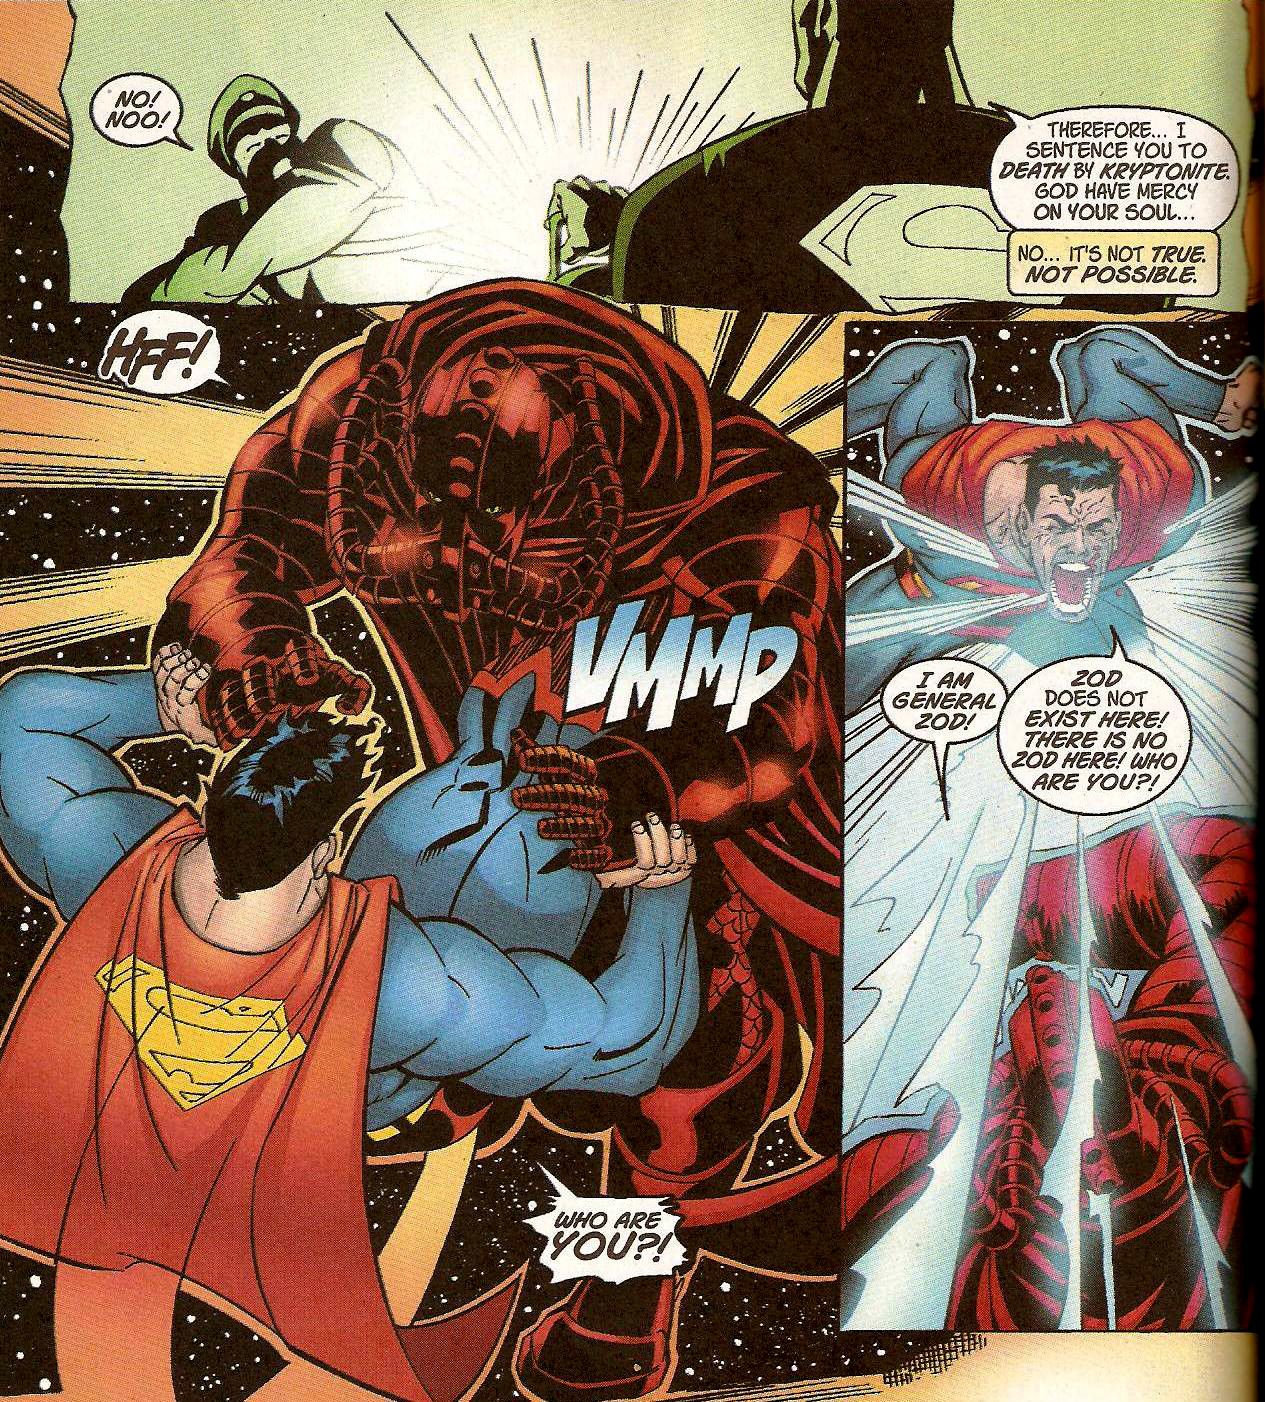 From Action Comics (Vol. 1) #780 (2001)